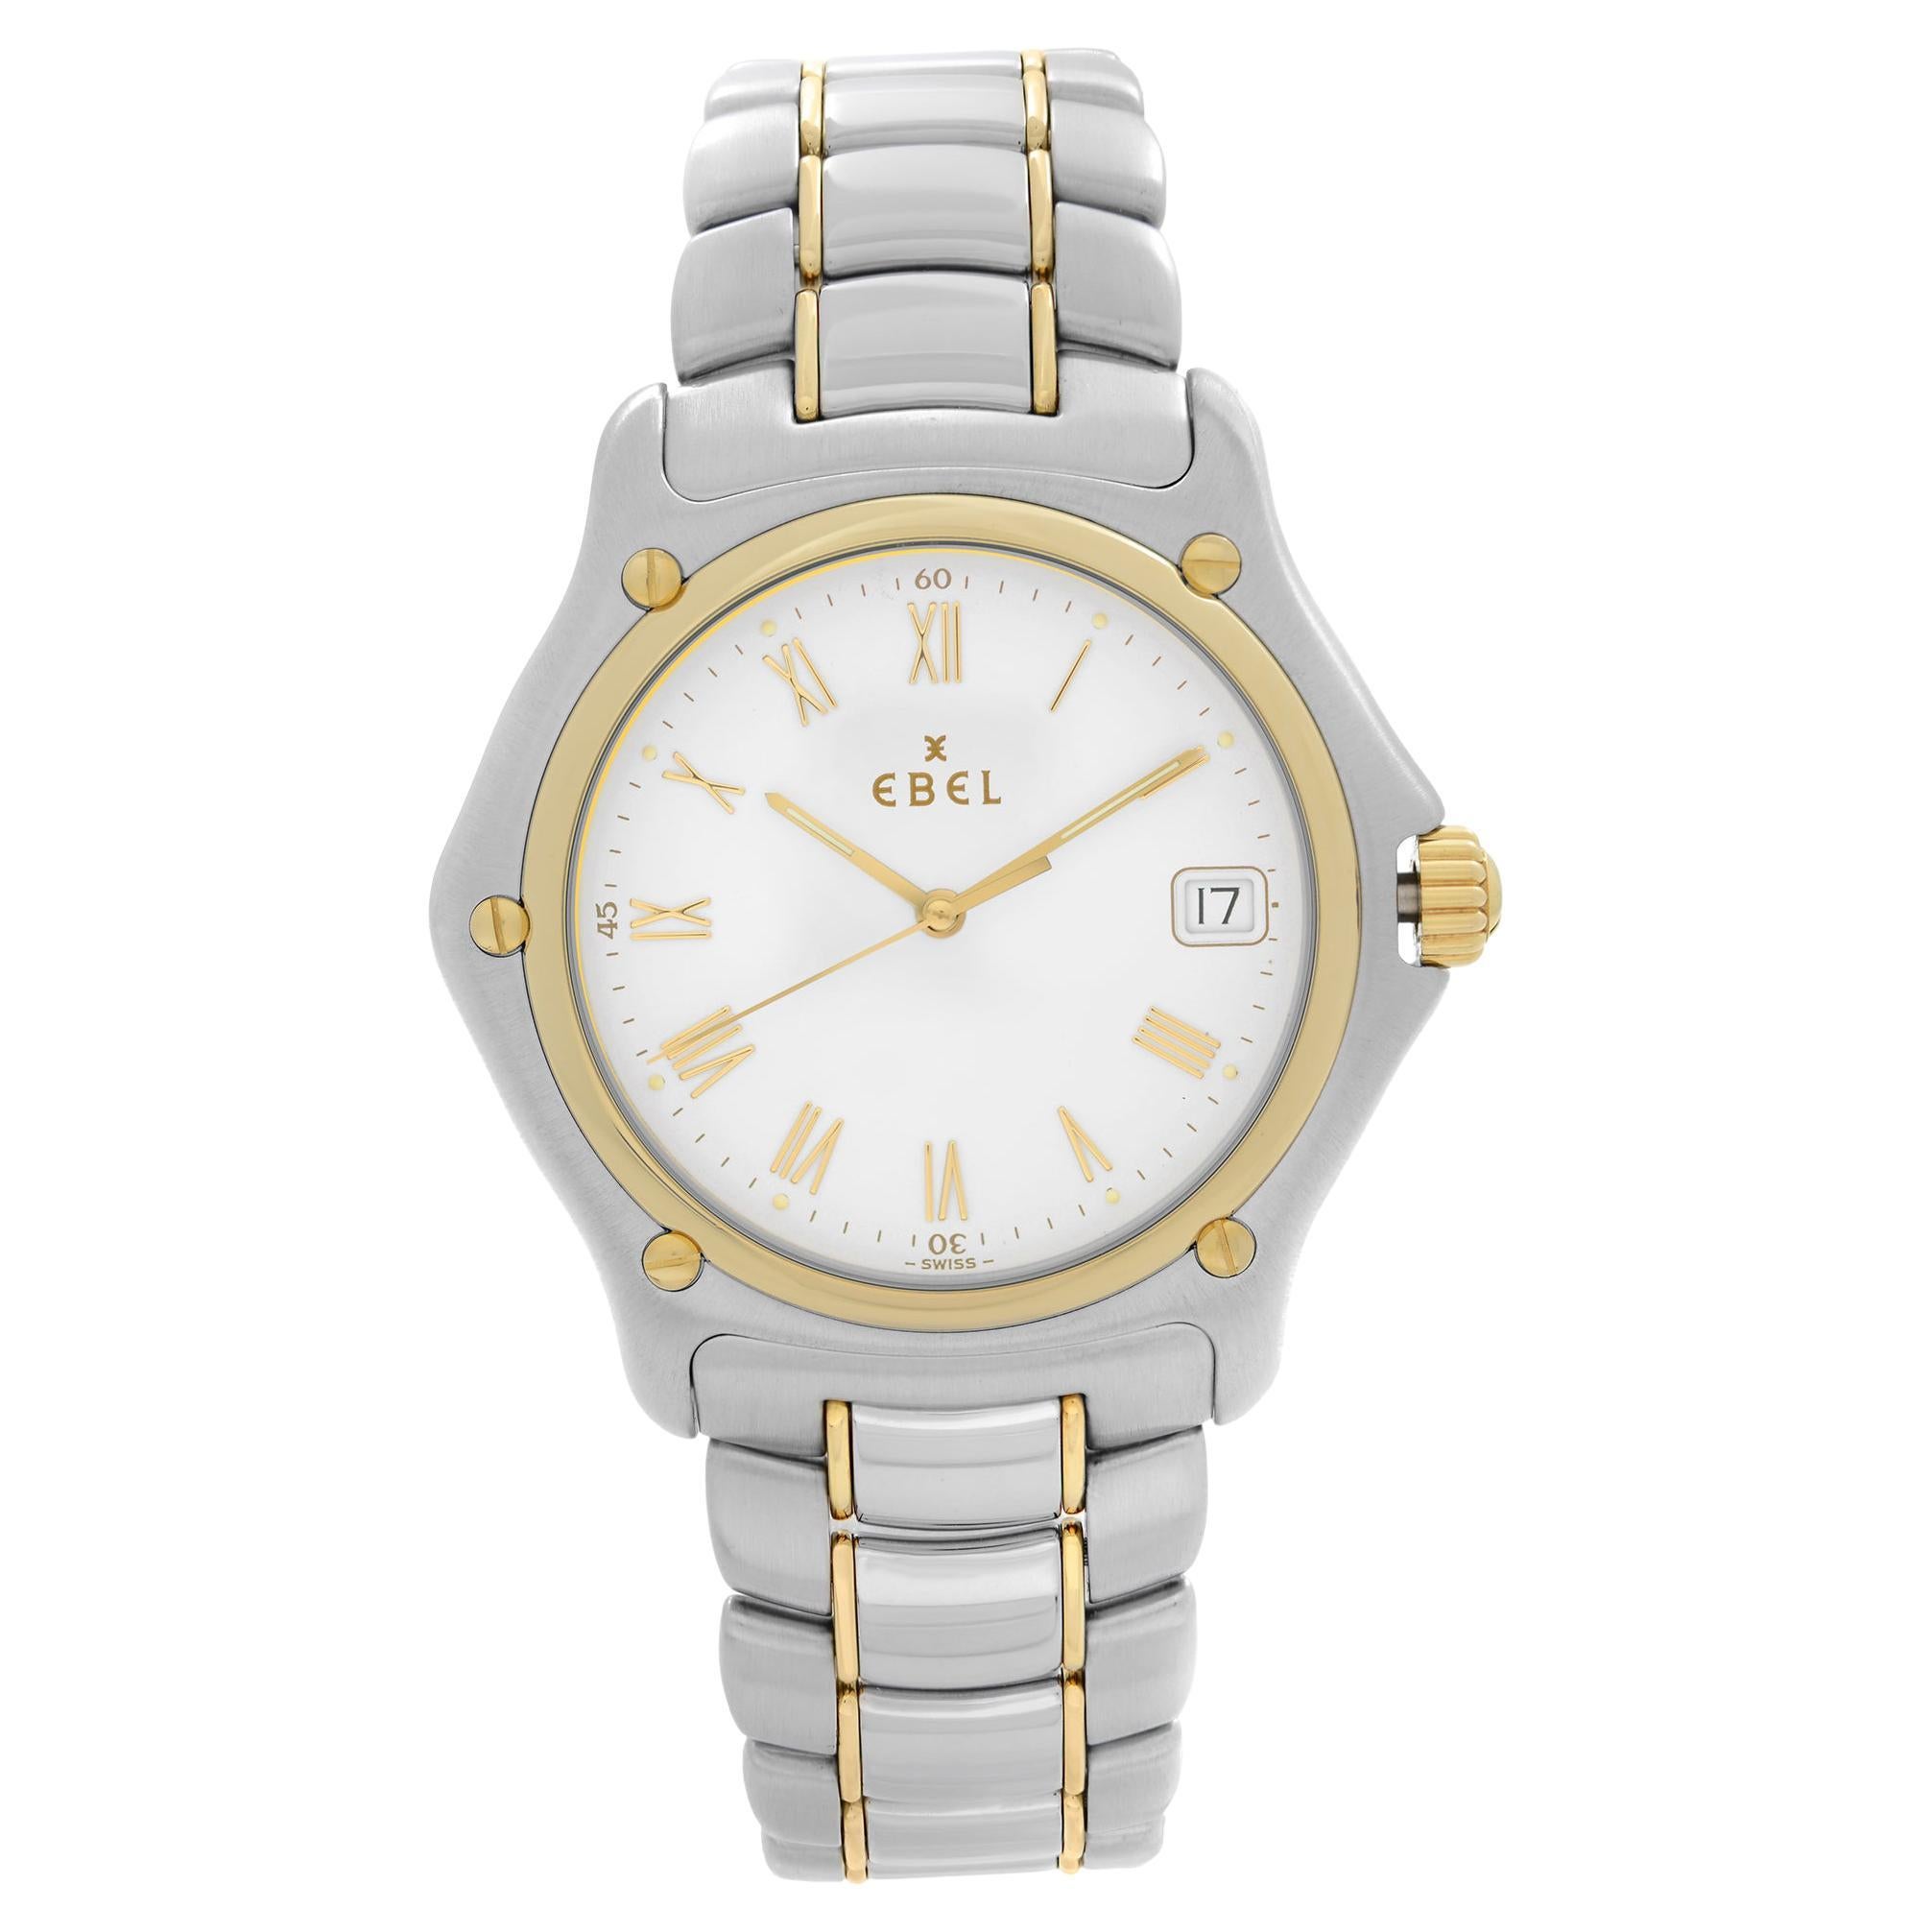 Ebel 1911 18k Yellow Gold Stainless Steel White Dial Quartz Mens Watch 1187916